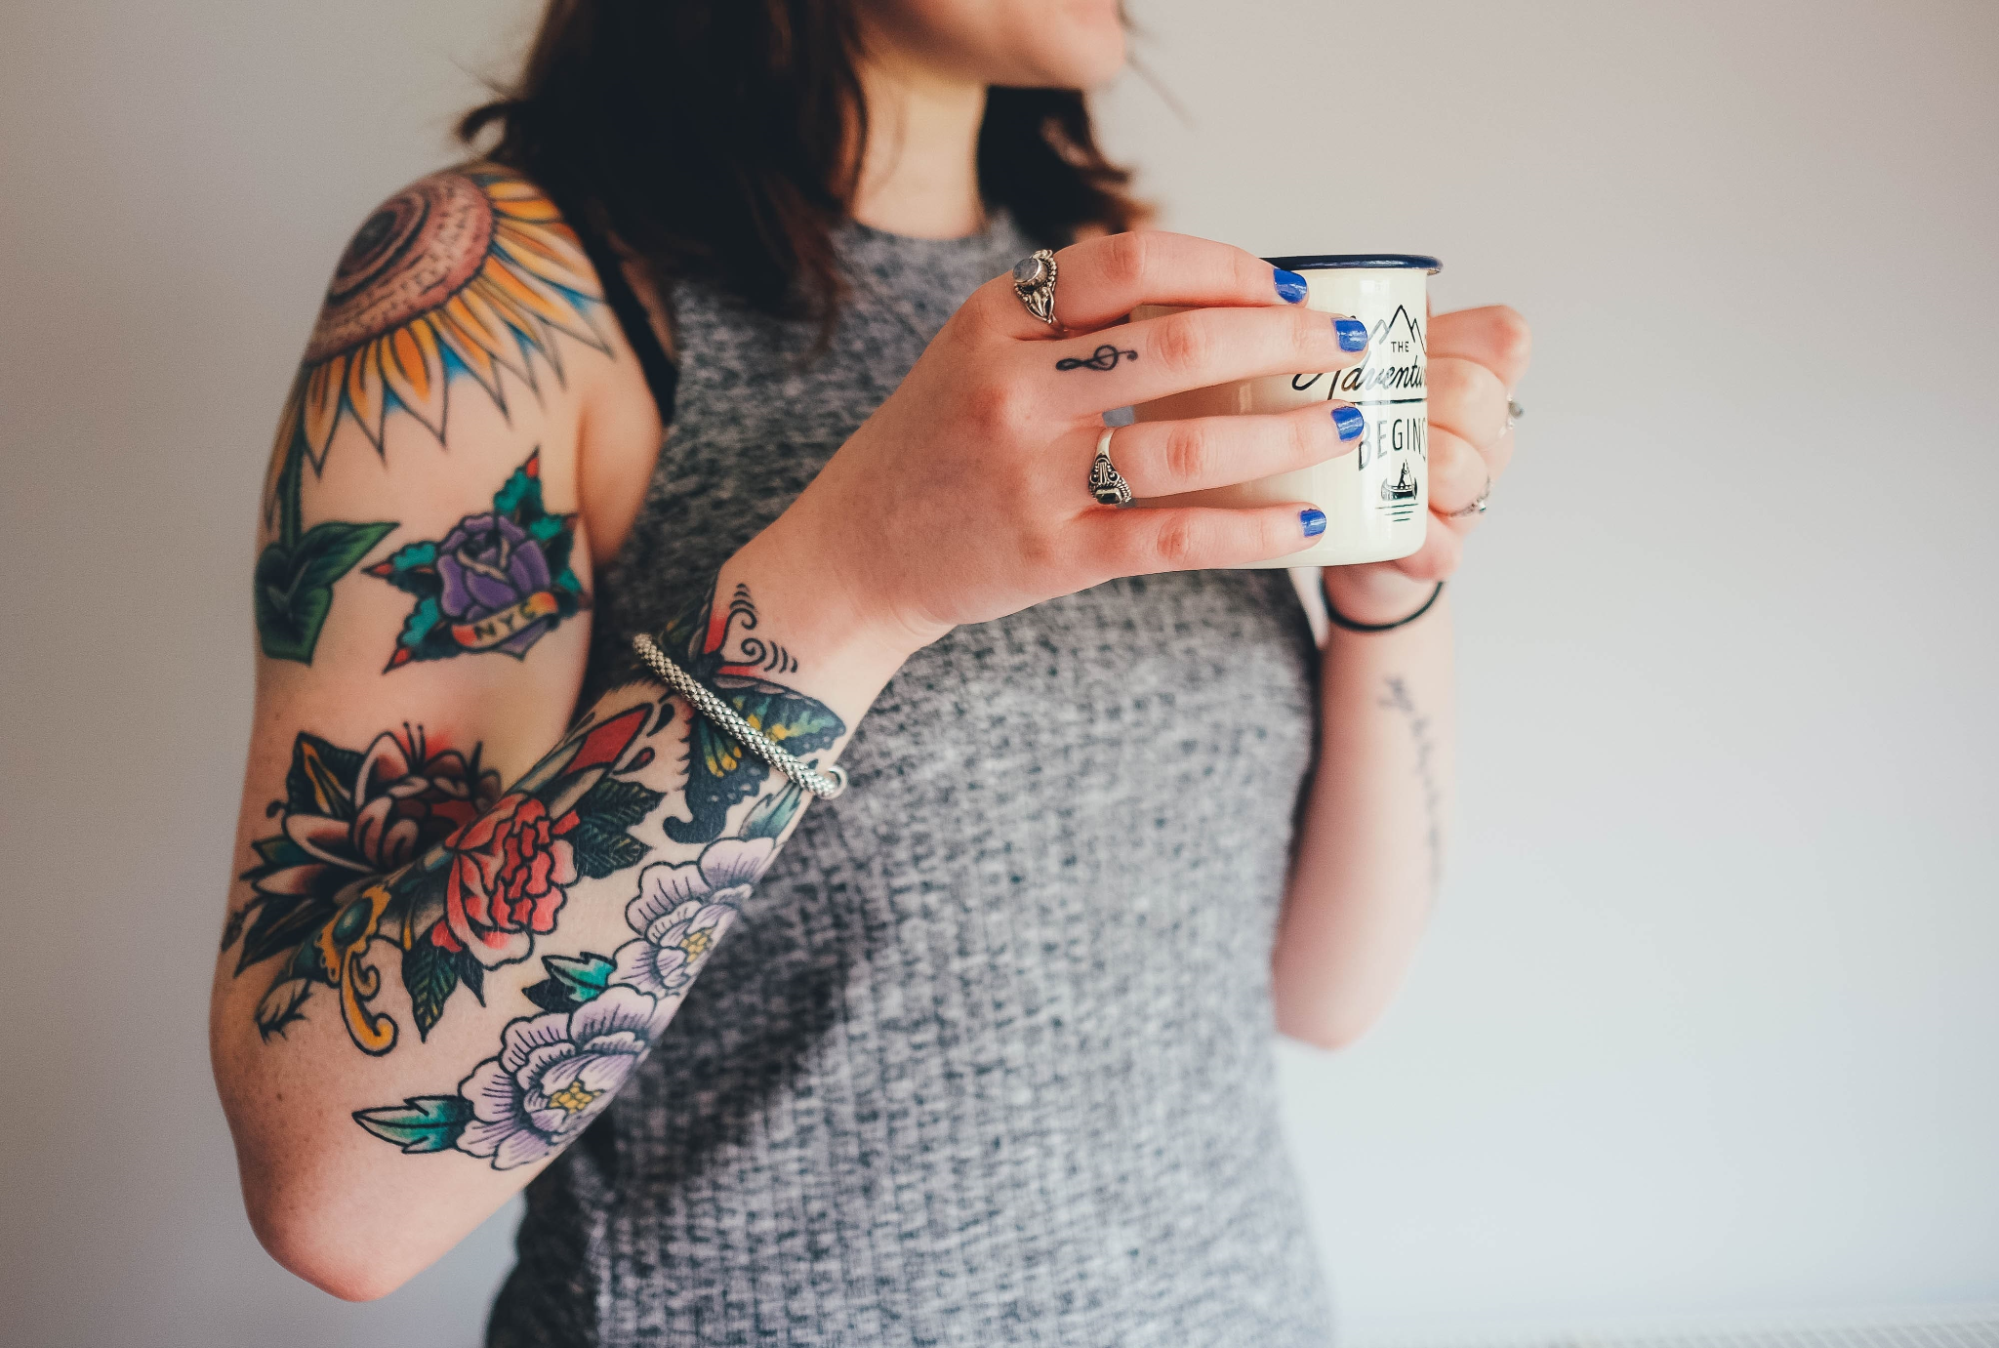 lady with tattoos on her arms holding a coffee mug and wearing bracelets